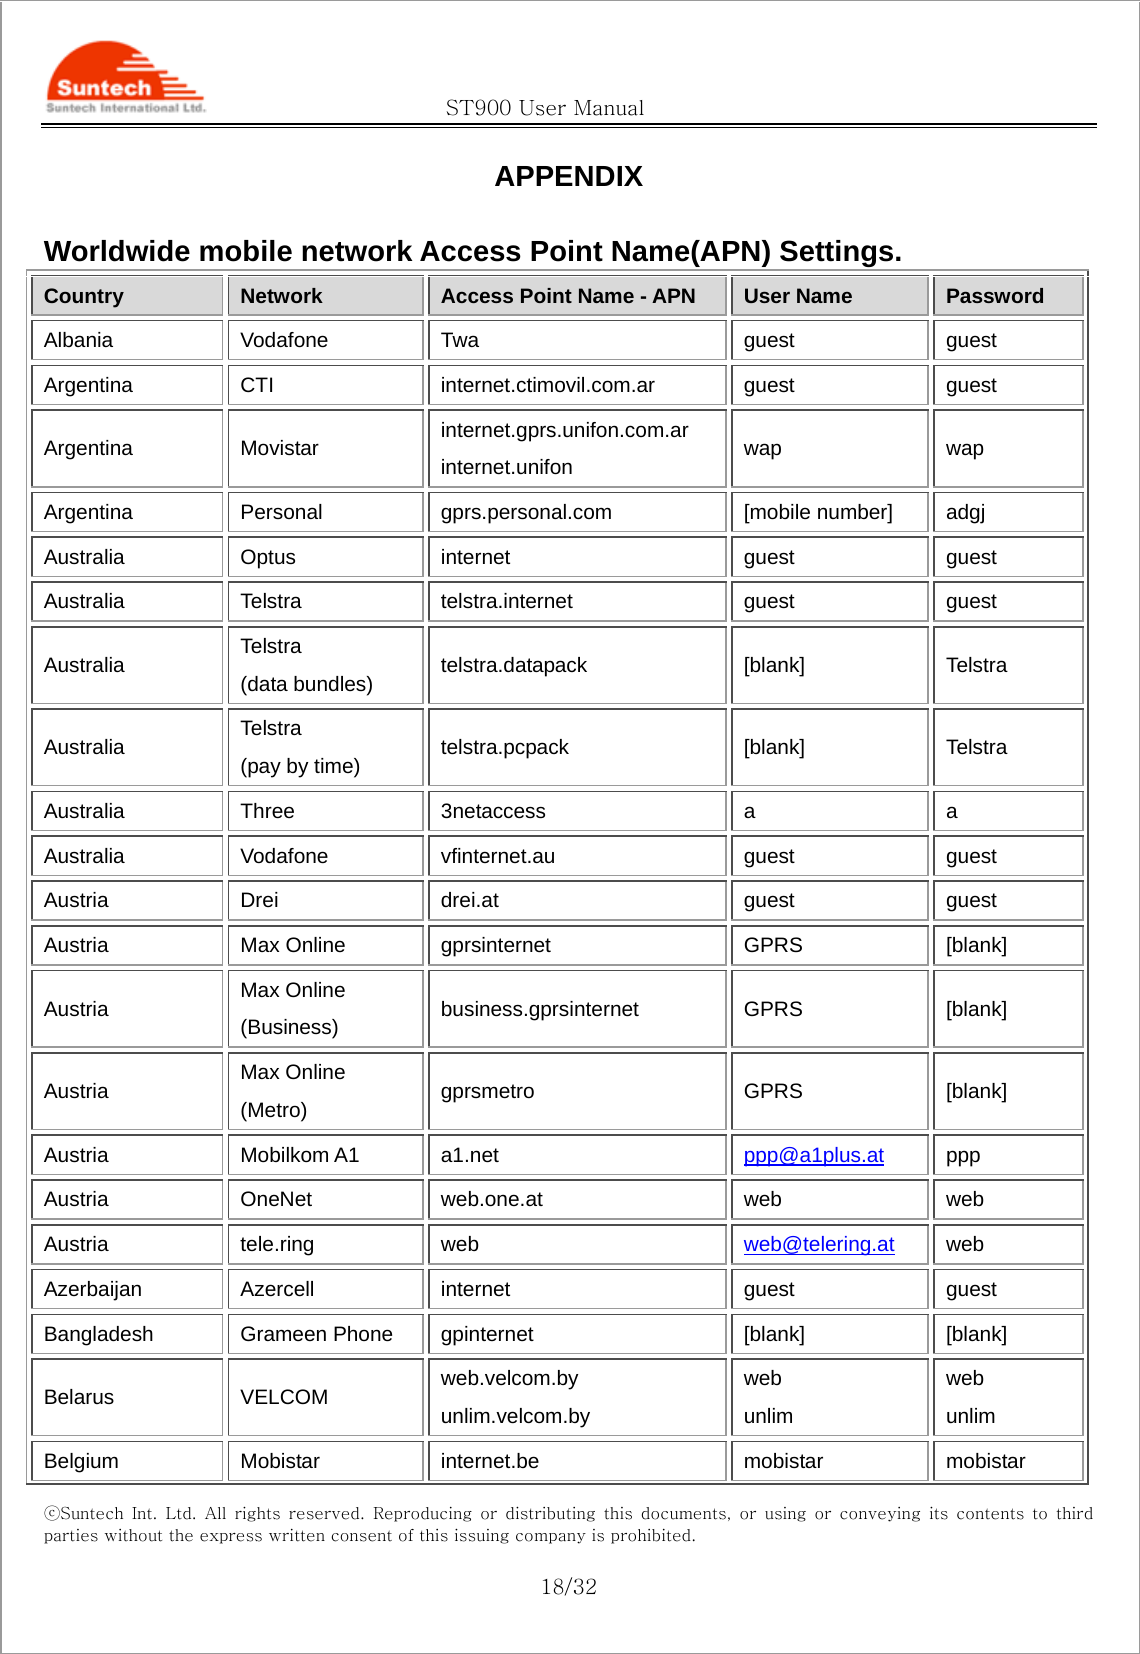                                               ST900 User Manual ⓒSuntech  Int.  Ltd.  All  rights  reserved.  Reproducing  or  distributing this documents, or using or conveying its contents to third parties without the express written consent of this issuing company is prohibited.  18/32 APPENDIX  Worldwide mobile network Access Point Name(APN) Settings. Country Network Access Point Name - APN User Name Password Albania Vodafone Twa guest guest Argentina CTI internet.ctimovil.com.ar guest guest Argentina Movistar internet.gprs.unifon.com.ar internet.unifon wap wap Argentina Personal gprs.personal.com [mobile number] adgj Australia Optus internet guest guest Australia Telstra telstra.internet guest guest Australia Telstra (data bundles) telstra.datapack [blank] Telstra Australia Telstra (pay by time) telstra.pcpack [blank] Telstra Australia Three 3netaccess a a Australia Vodafone vfinternet.au guest guest Austria Drei drei.at guest guest Austria Max Online gprsinternet GPRS [blank] Austria Max Online (Business) business.gprsinternet GPRS [blank] Austria Max Online (Metro) gprsmetro GPRS [blank] Austria Mobilkom A1 a1.net ppp@a1plus.at  ppp Austria OneNet web.one.at web web Austria tele.ring web web@telering.at  web Azerbaijan Azercell internet guest guest Bangladesh Grameen Phone gpinternet [blank] [blank] Belarus VELCOM web.velcom.by unlim.velcom.by web unlim web unlim Belgium Mobistar internet.be mobistar mobistar 